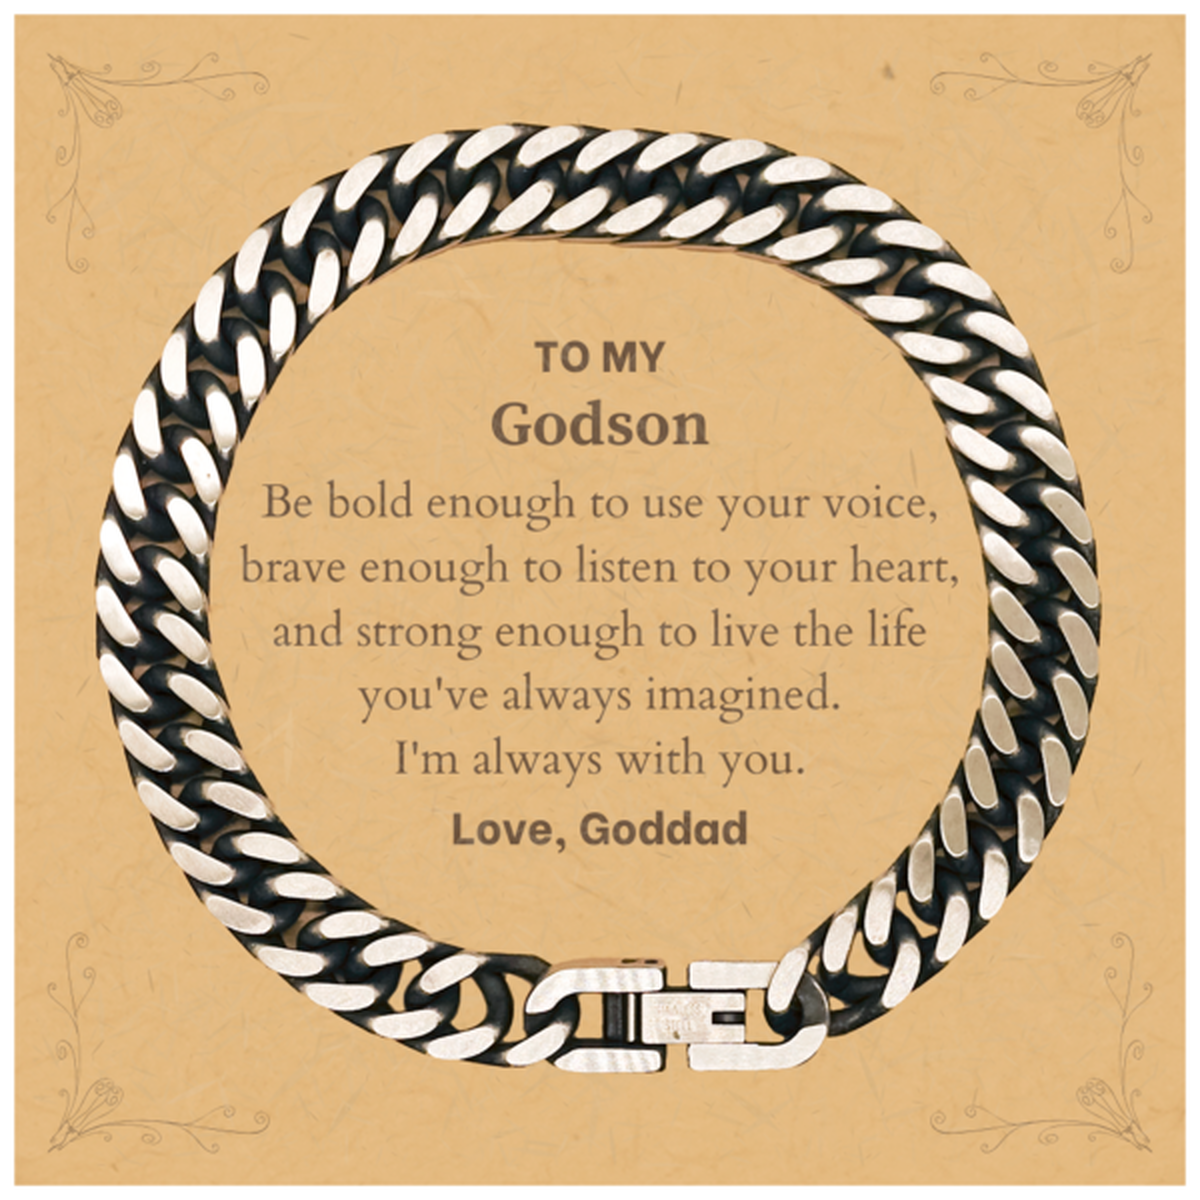 Keepsake Godson Cuban Link Chain Bracelet Gift Idea Graduation Christmas Birthday Godson from Goddad, Godson Be bold enough to use your voice, brave enough to listen to your heart. Love, Goddad